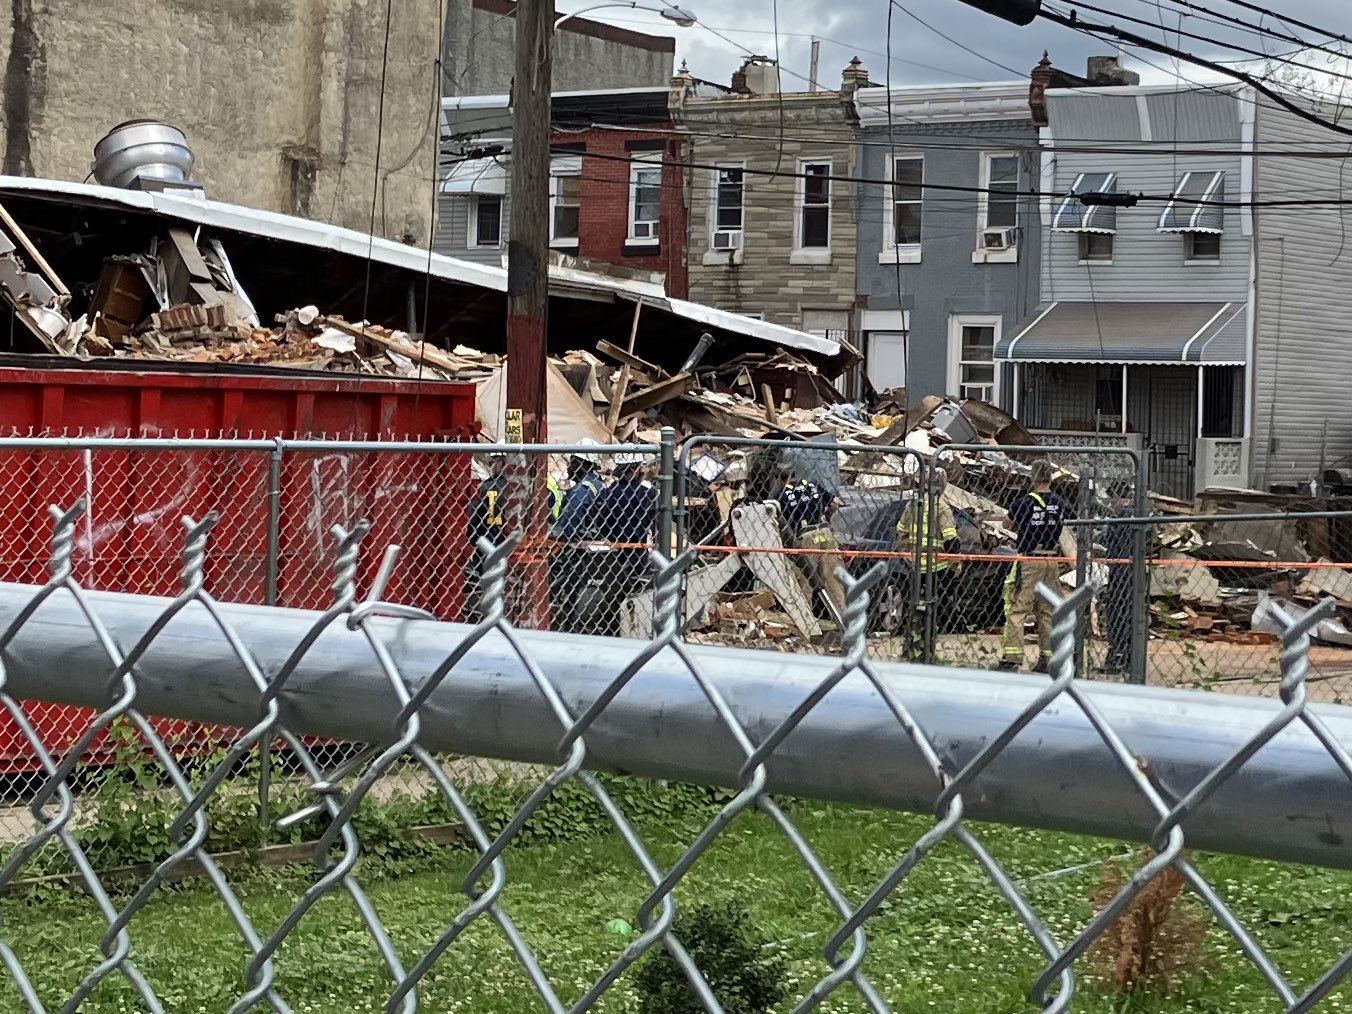 Philadelphia Firefighter Dead, 5 Others Injured After Building Collapses In Fairhill